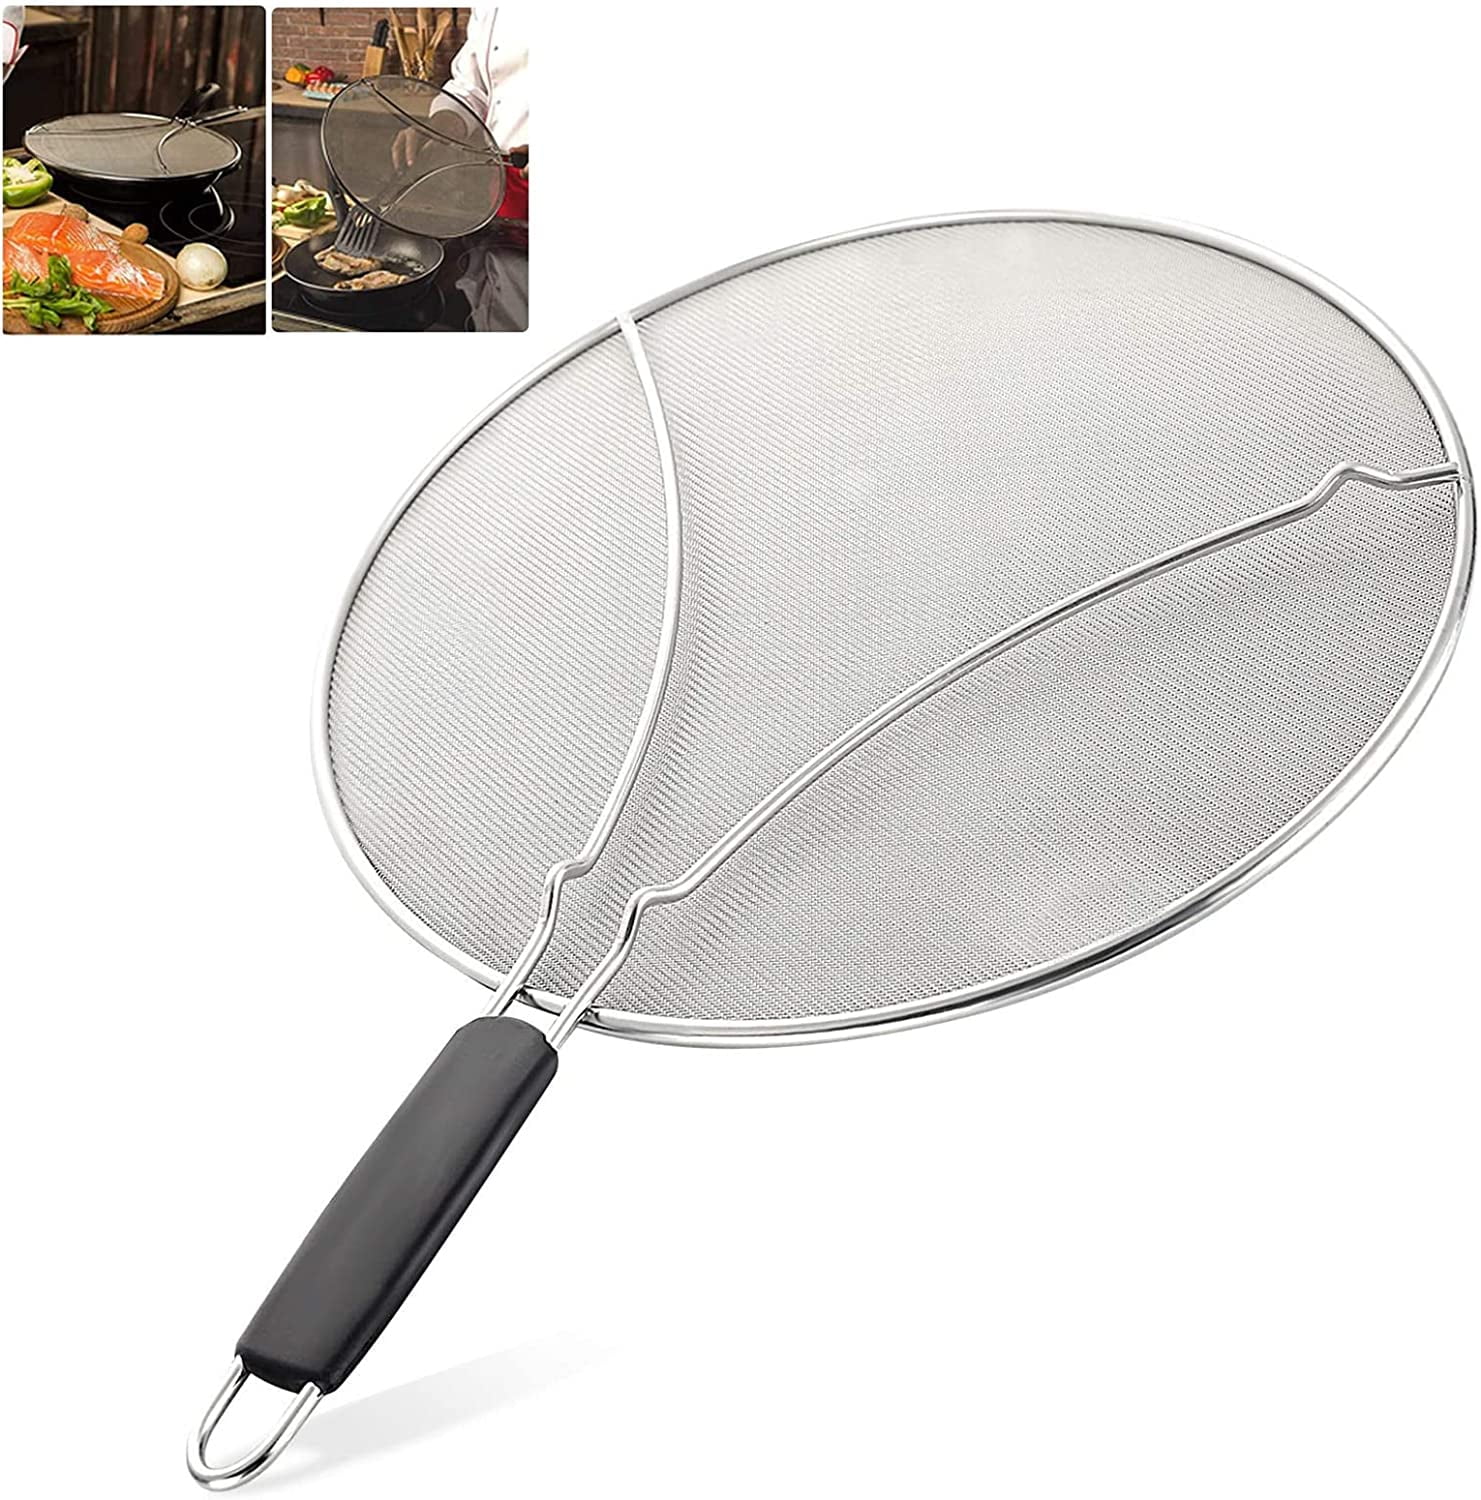 Pro Chef Kitchen Tools Stainless Steel Grease Splatter Screen